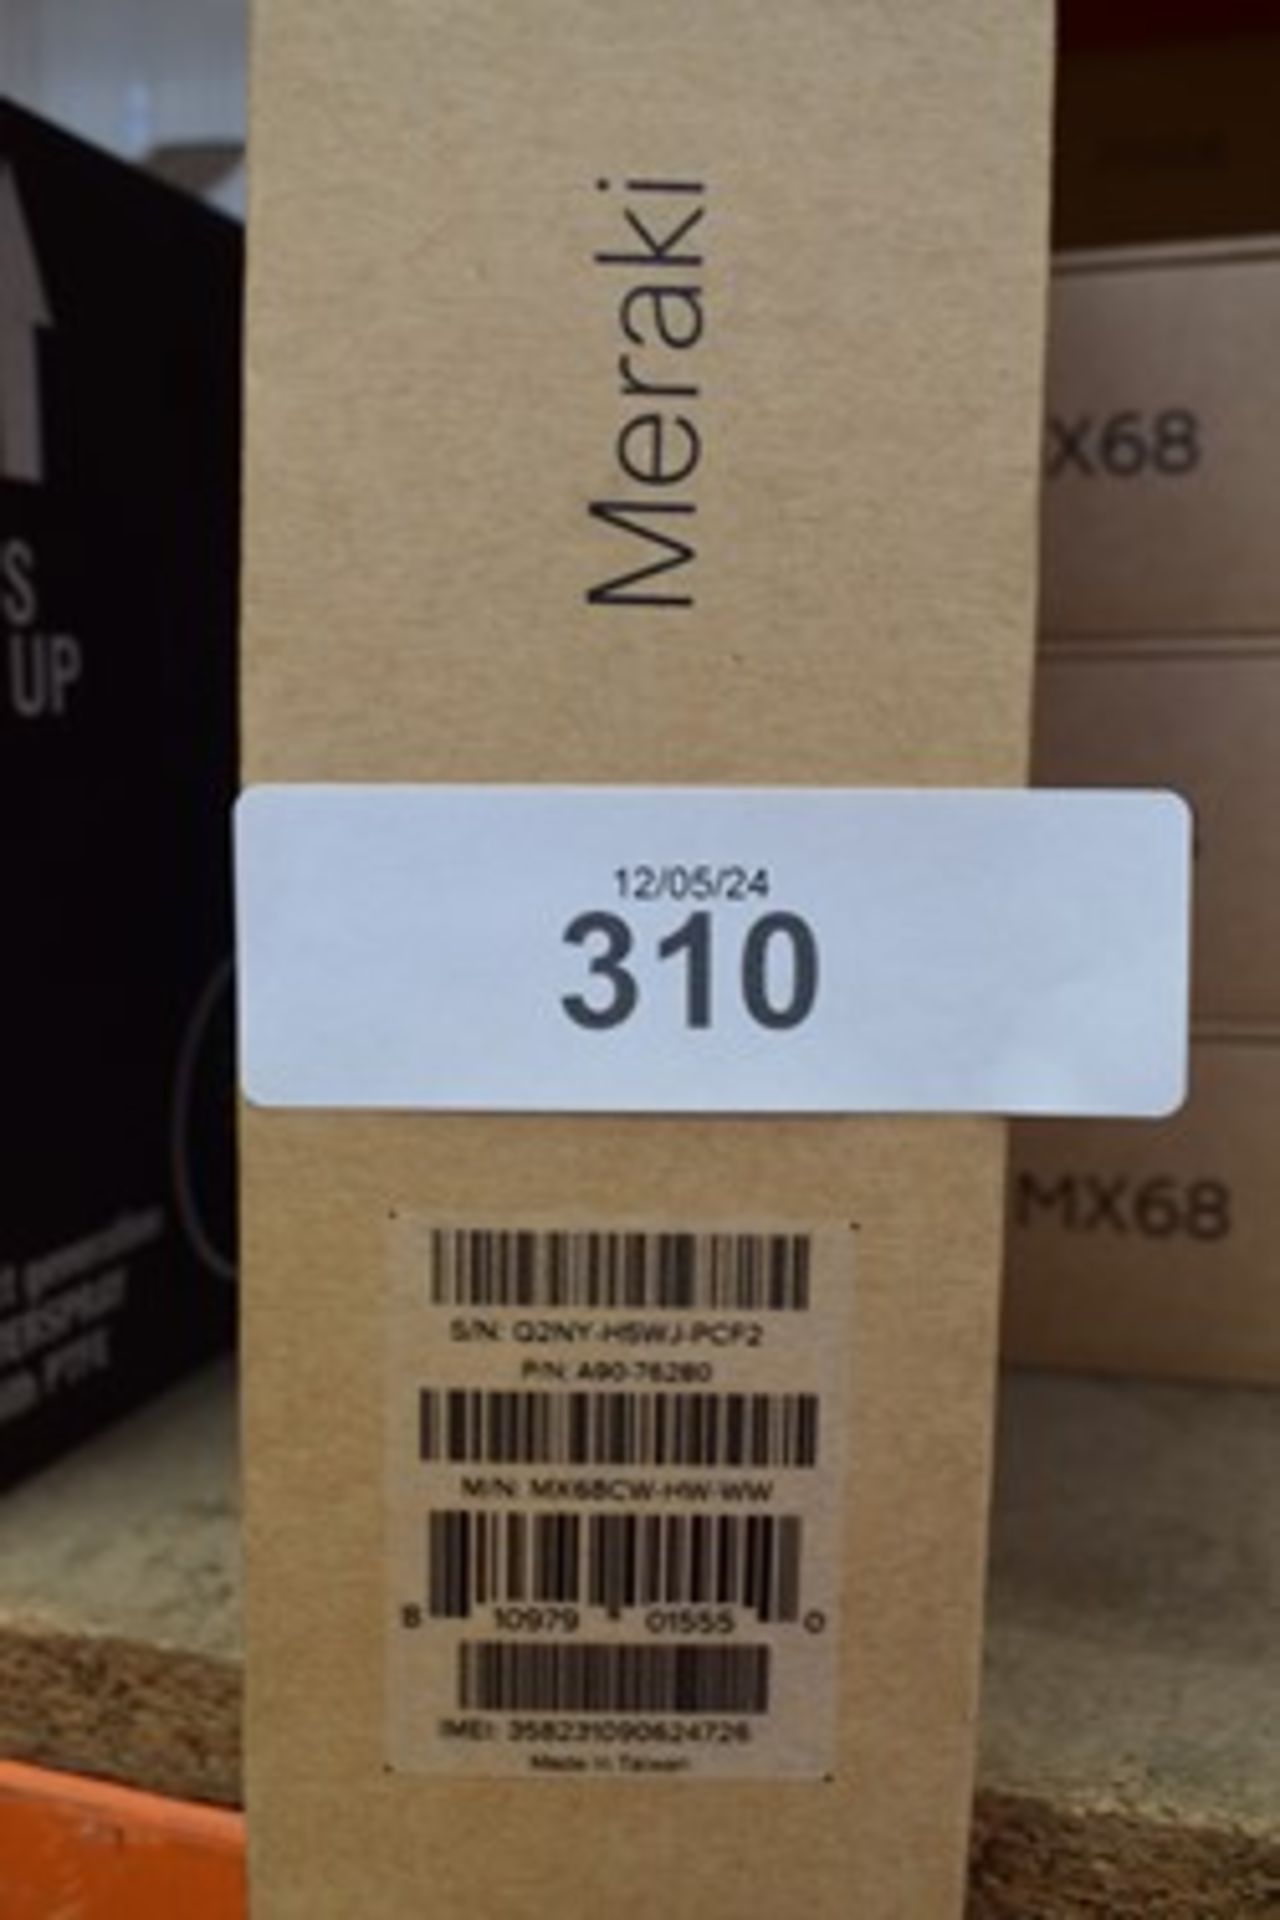 1 x Cisco MX68CW unit, product No: A90-76280 - sealed new in box (C18)